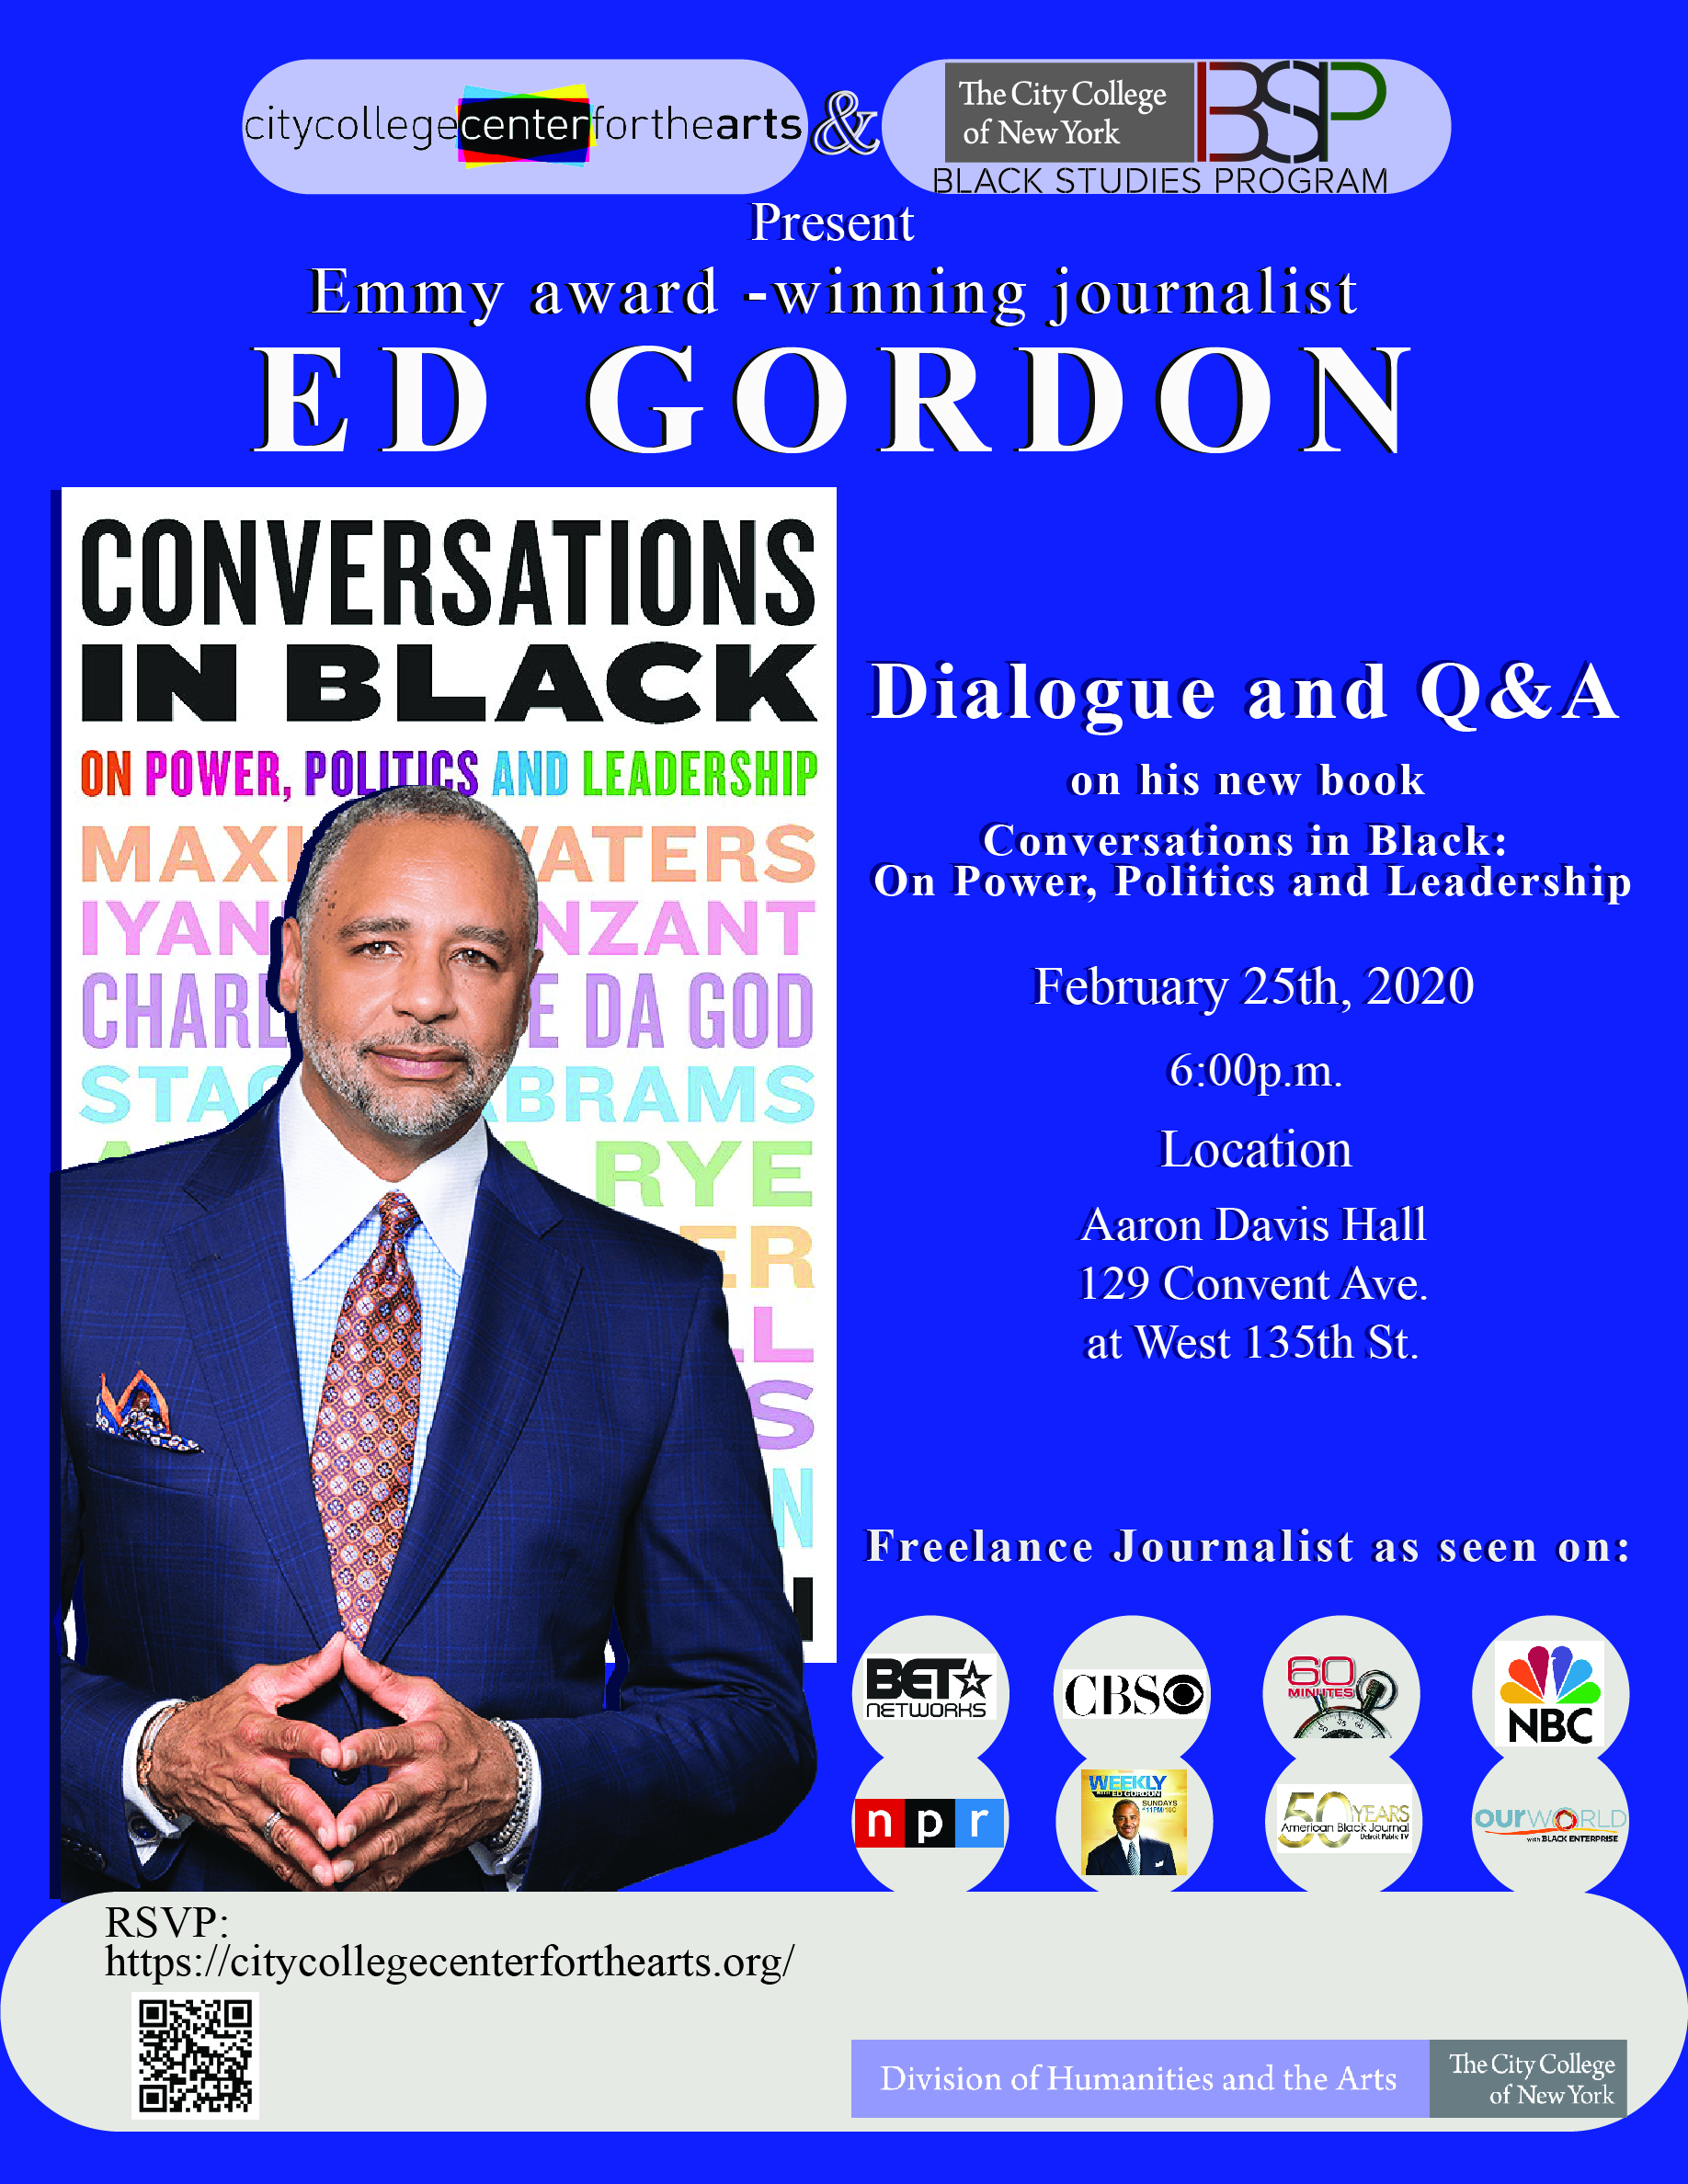 the City College Center for the arts and the Black Studies Program Present: Emmy award Winning Journalist: Ed gorden.  Dialogue and Q&A on his new book - Conversations in Black:  On Power, Politics and Leadership. February 25th, 2020 at 6:00PM. Location Aaron Davis Hall 129 Convent Ave. at West 135th St. Freelance journalist as seen on; BET, CBS, 60 Min, NBC, NPR, Today with Gorden, 50 Years Black Journal, and Our World. RSVP:  https://citycollegecenterforthearts.org/ . Co sponsored by the Humanities and the arts 